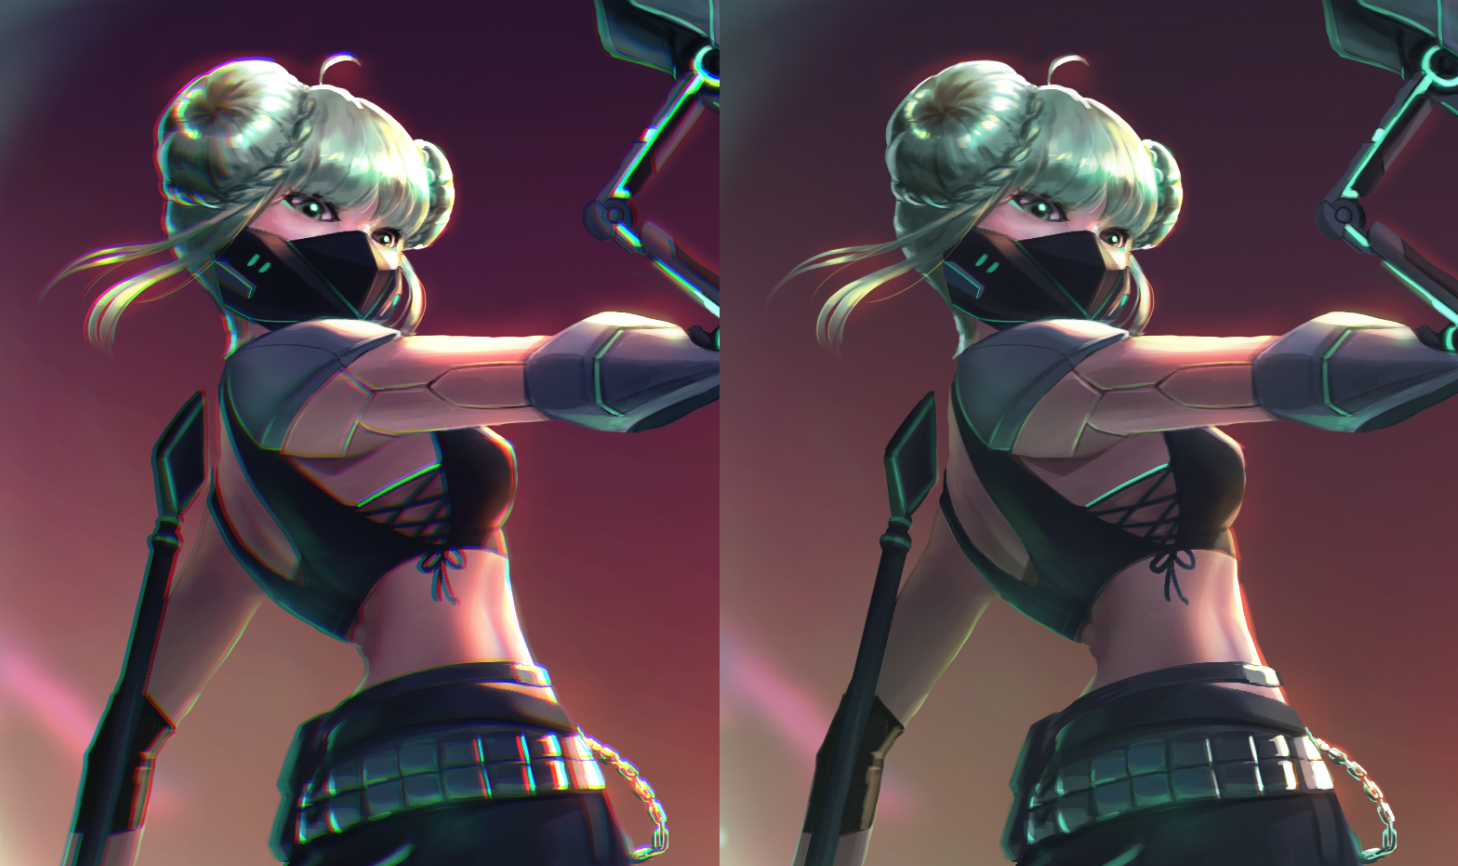 after - before Chromatic Aberration